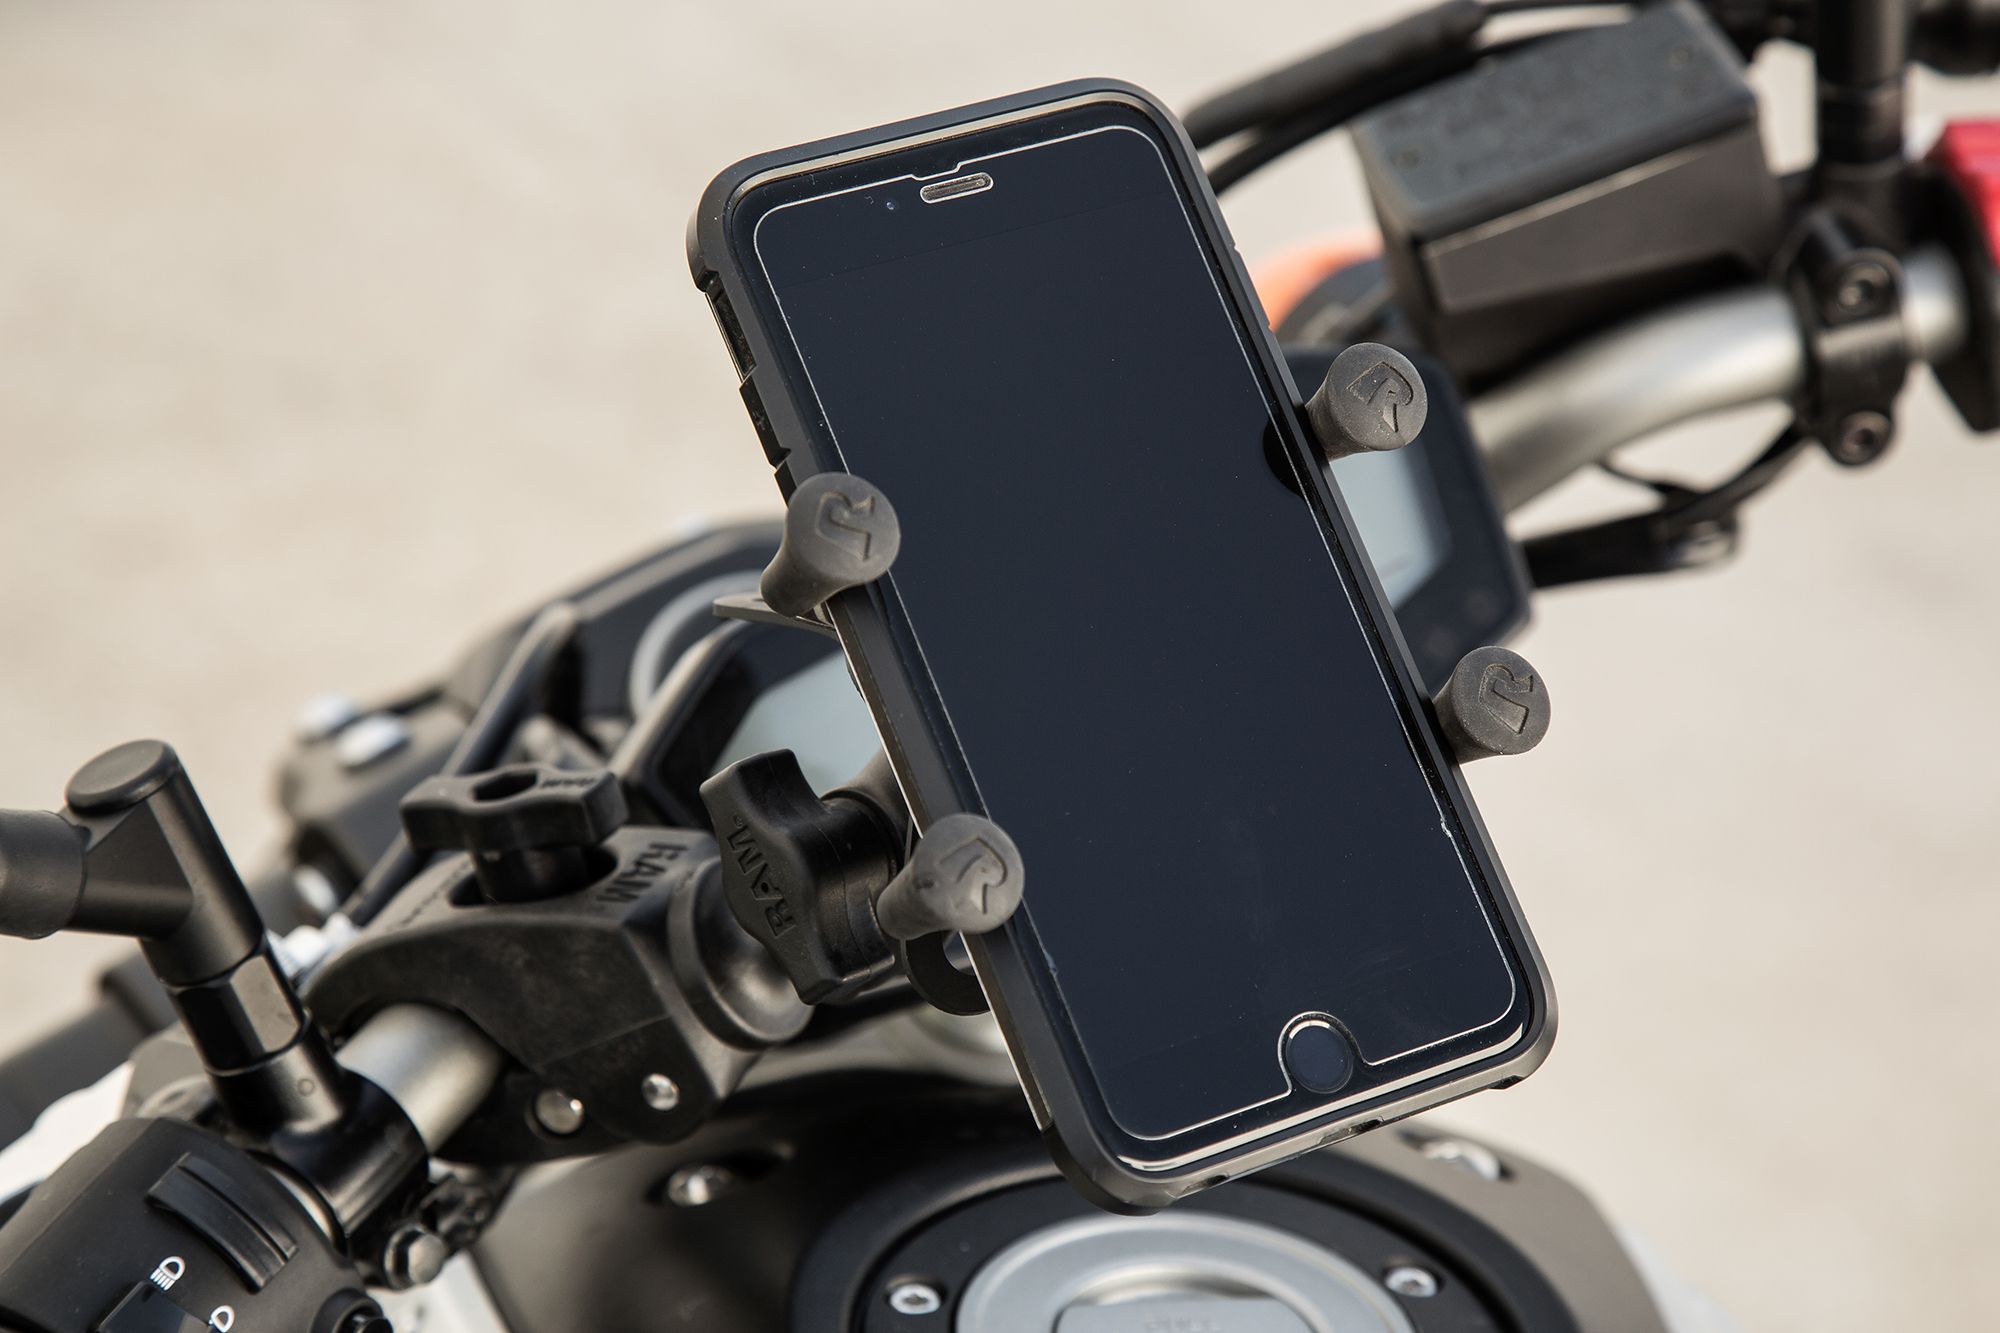 RAM Cell Phone Mount for Motorcycles